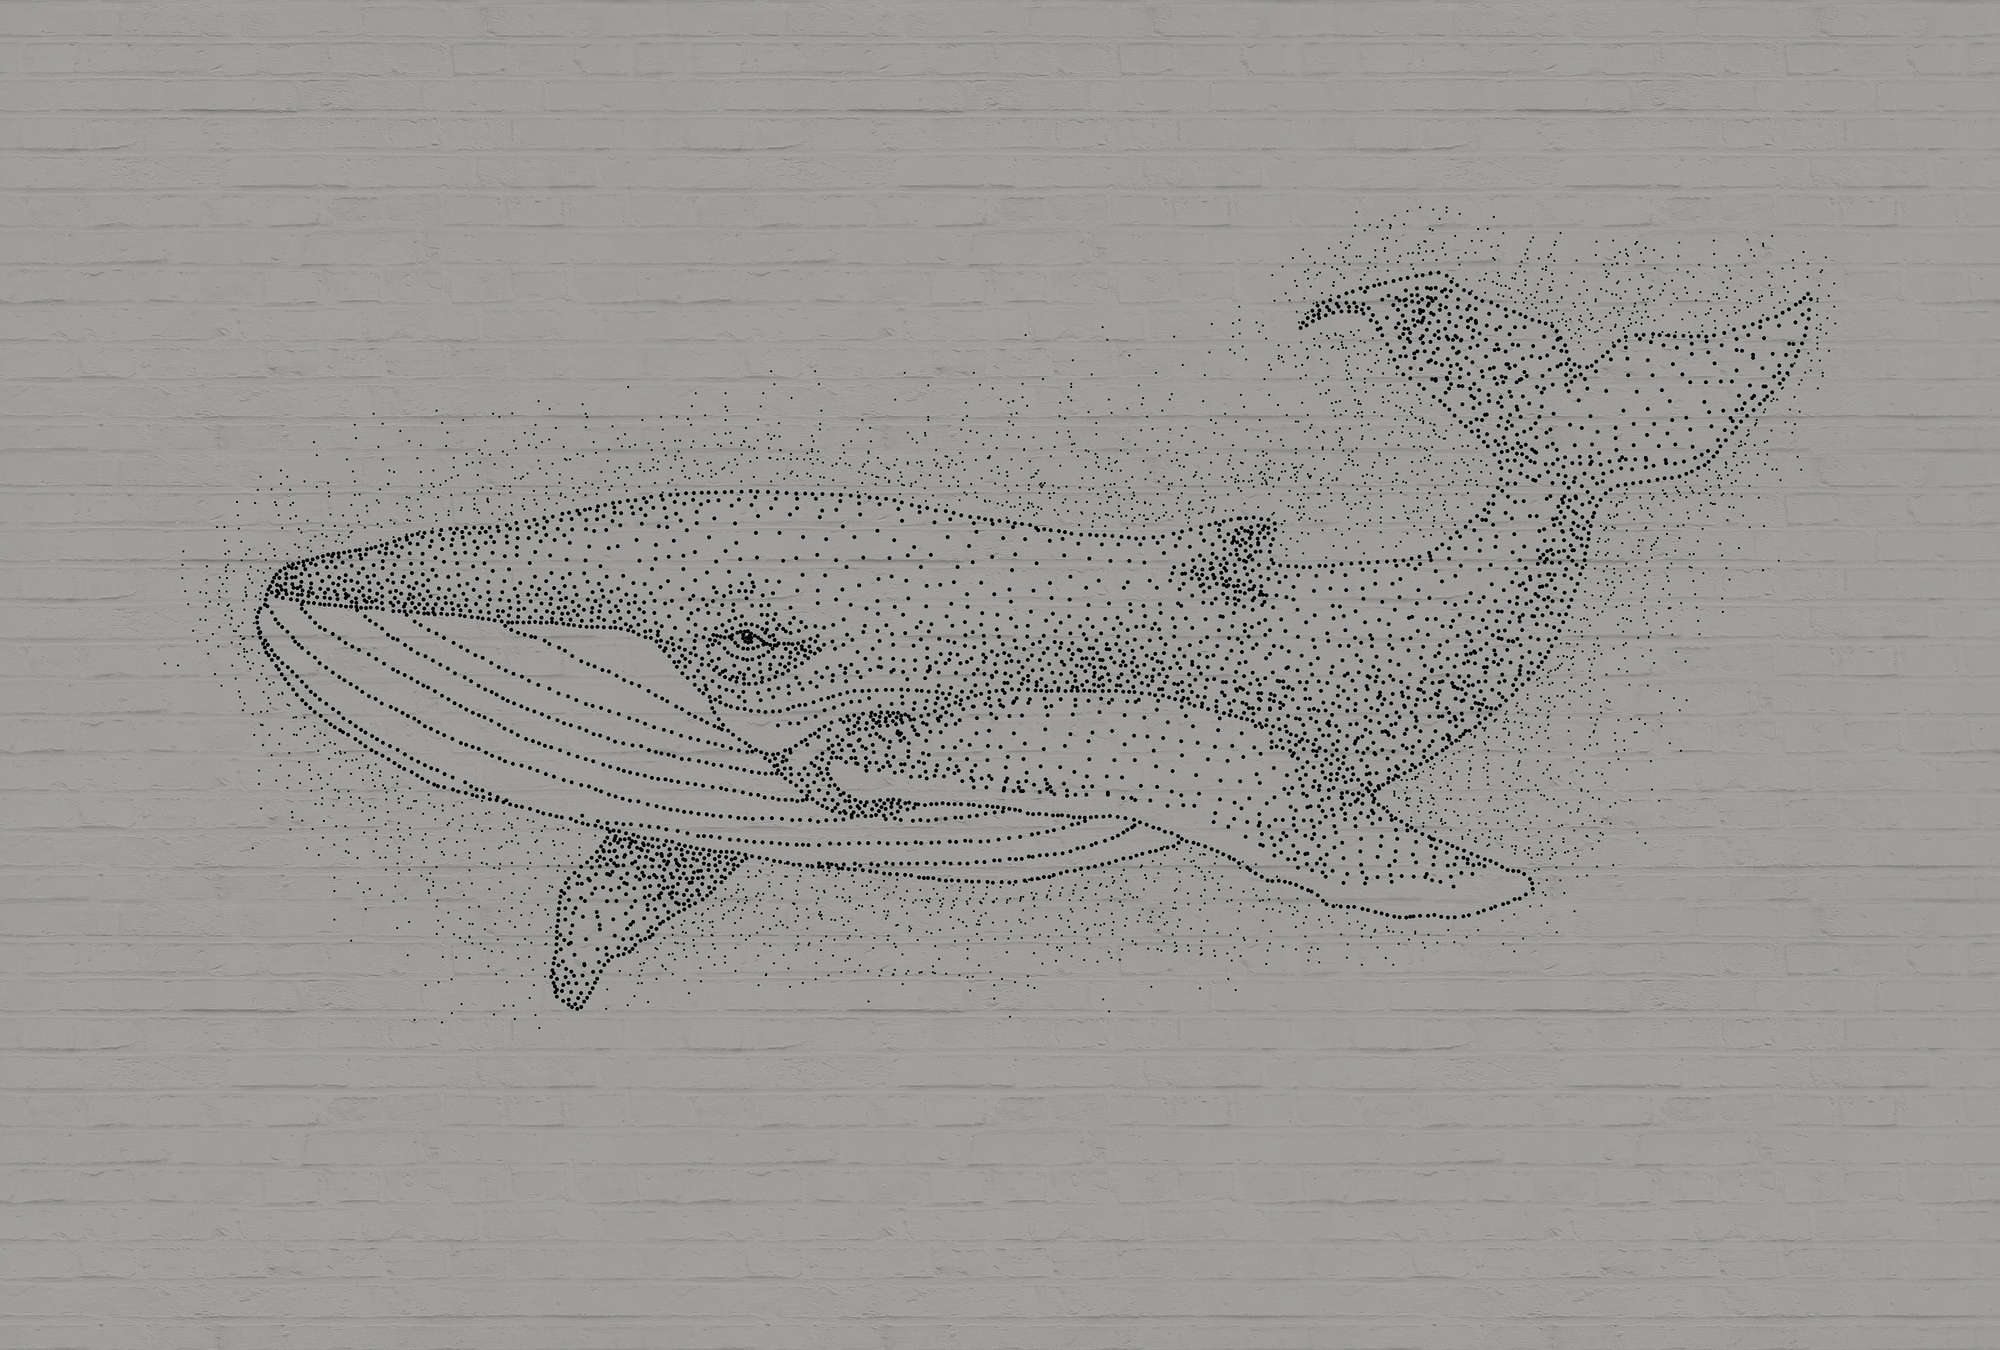             Photo wallpaper whale in drawing style on 3D stone wall
        